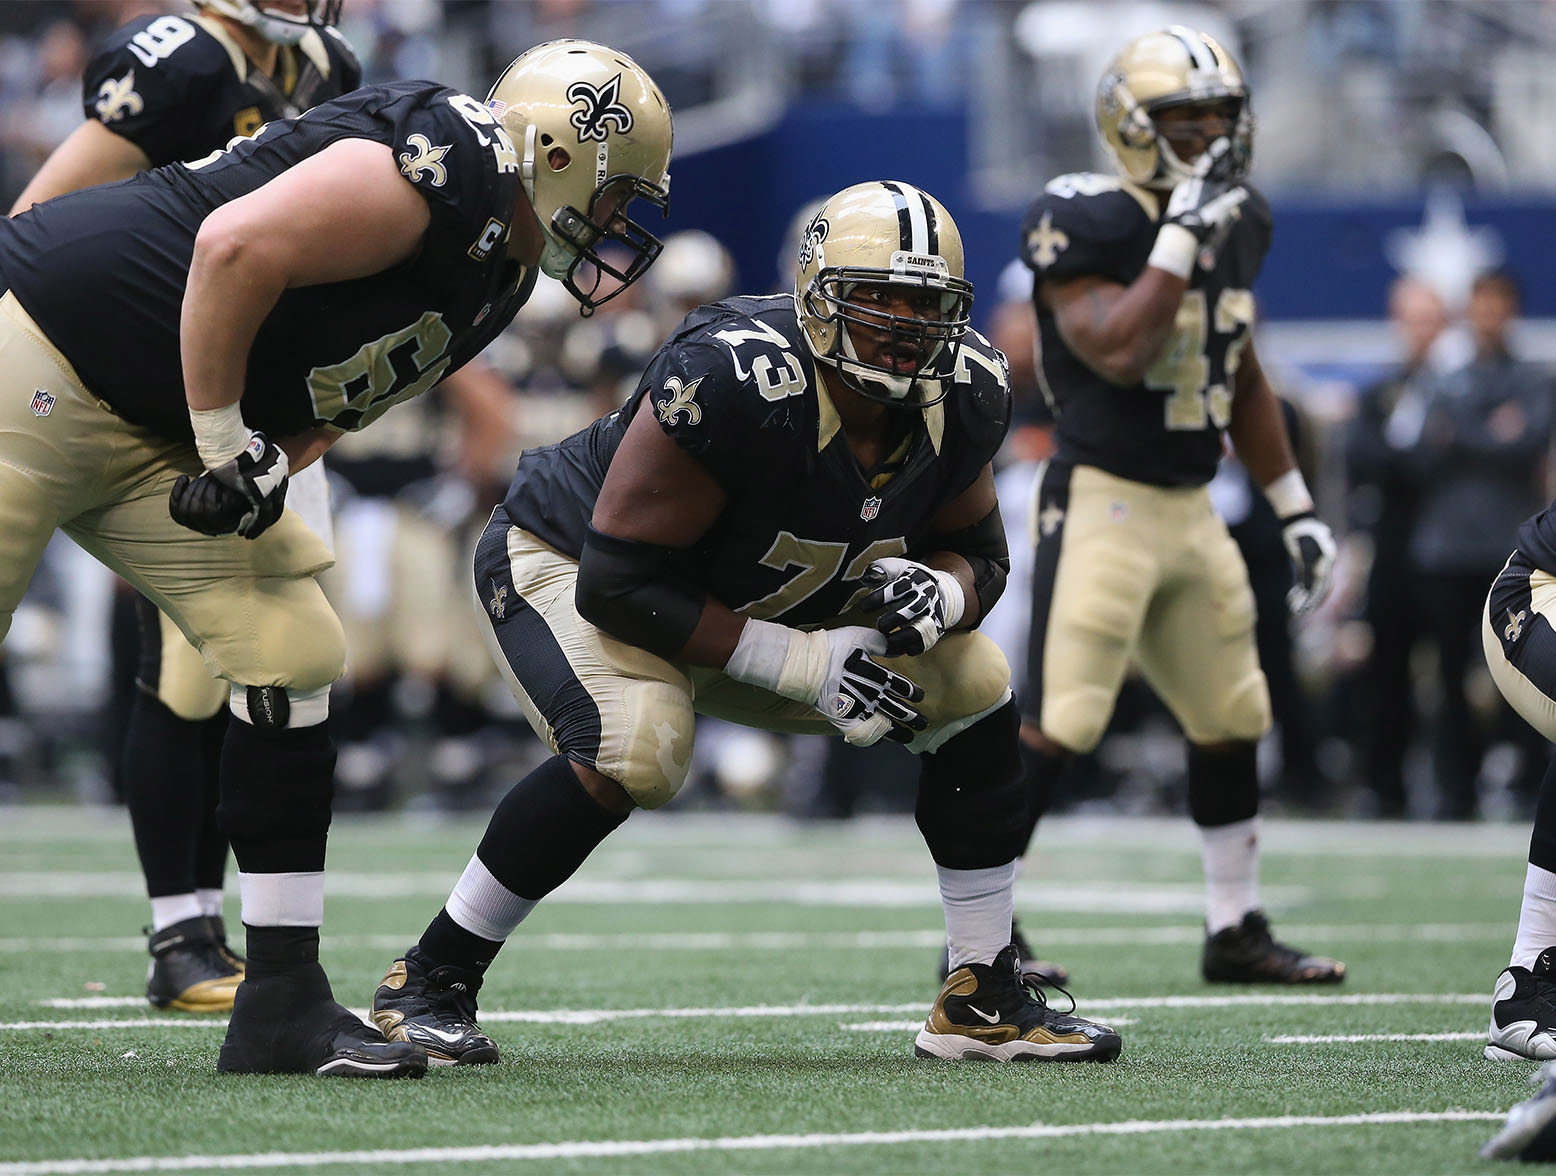 ARLINGTON, TX - DECEMBER 23: Jahri Evans #73 of the New Orleans Saints at Cowboys Stadium on December 23, 2012 in Arlington, Texas. (Photo by Ronald Martinez/Getty Images)